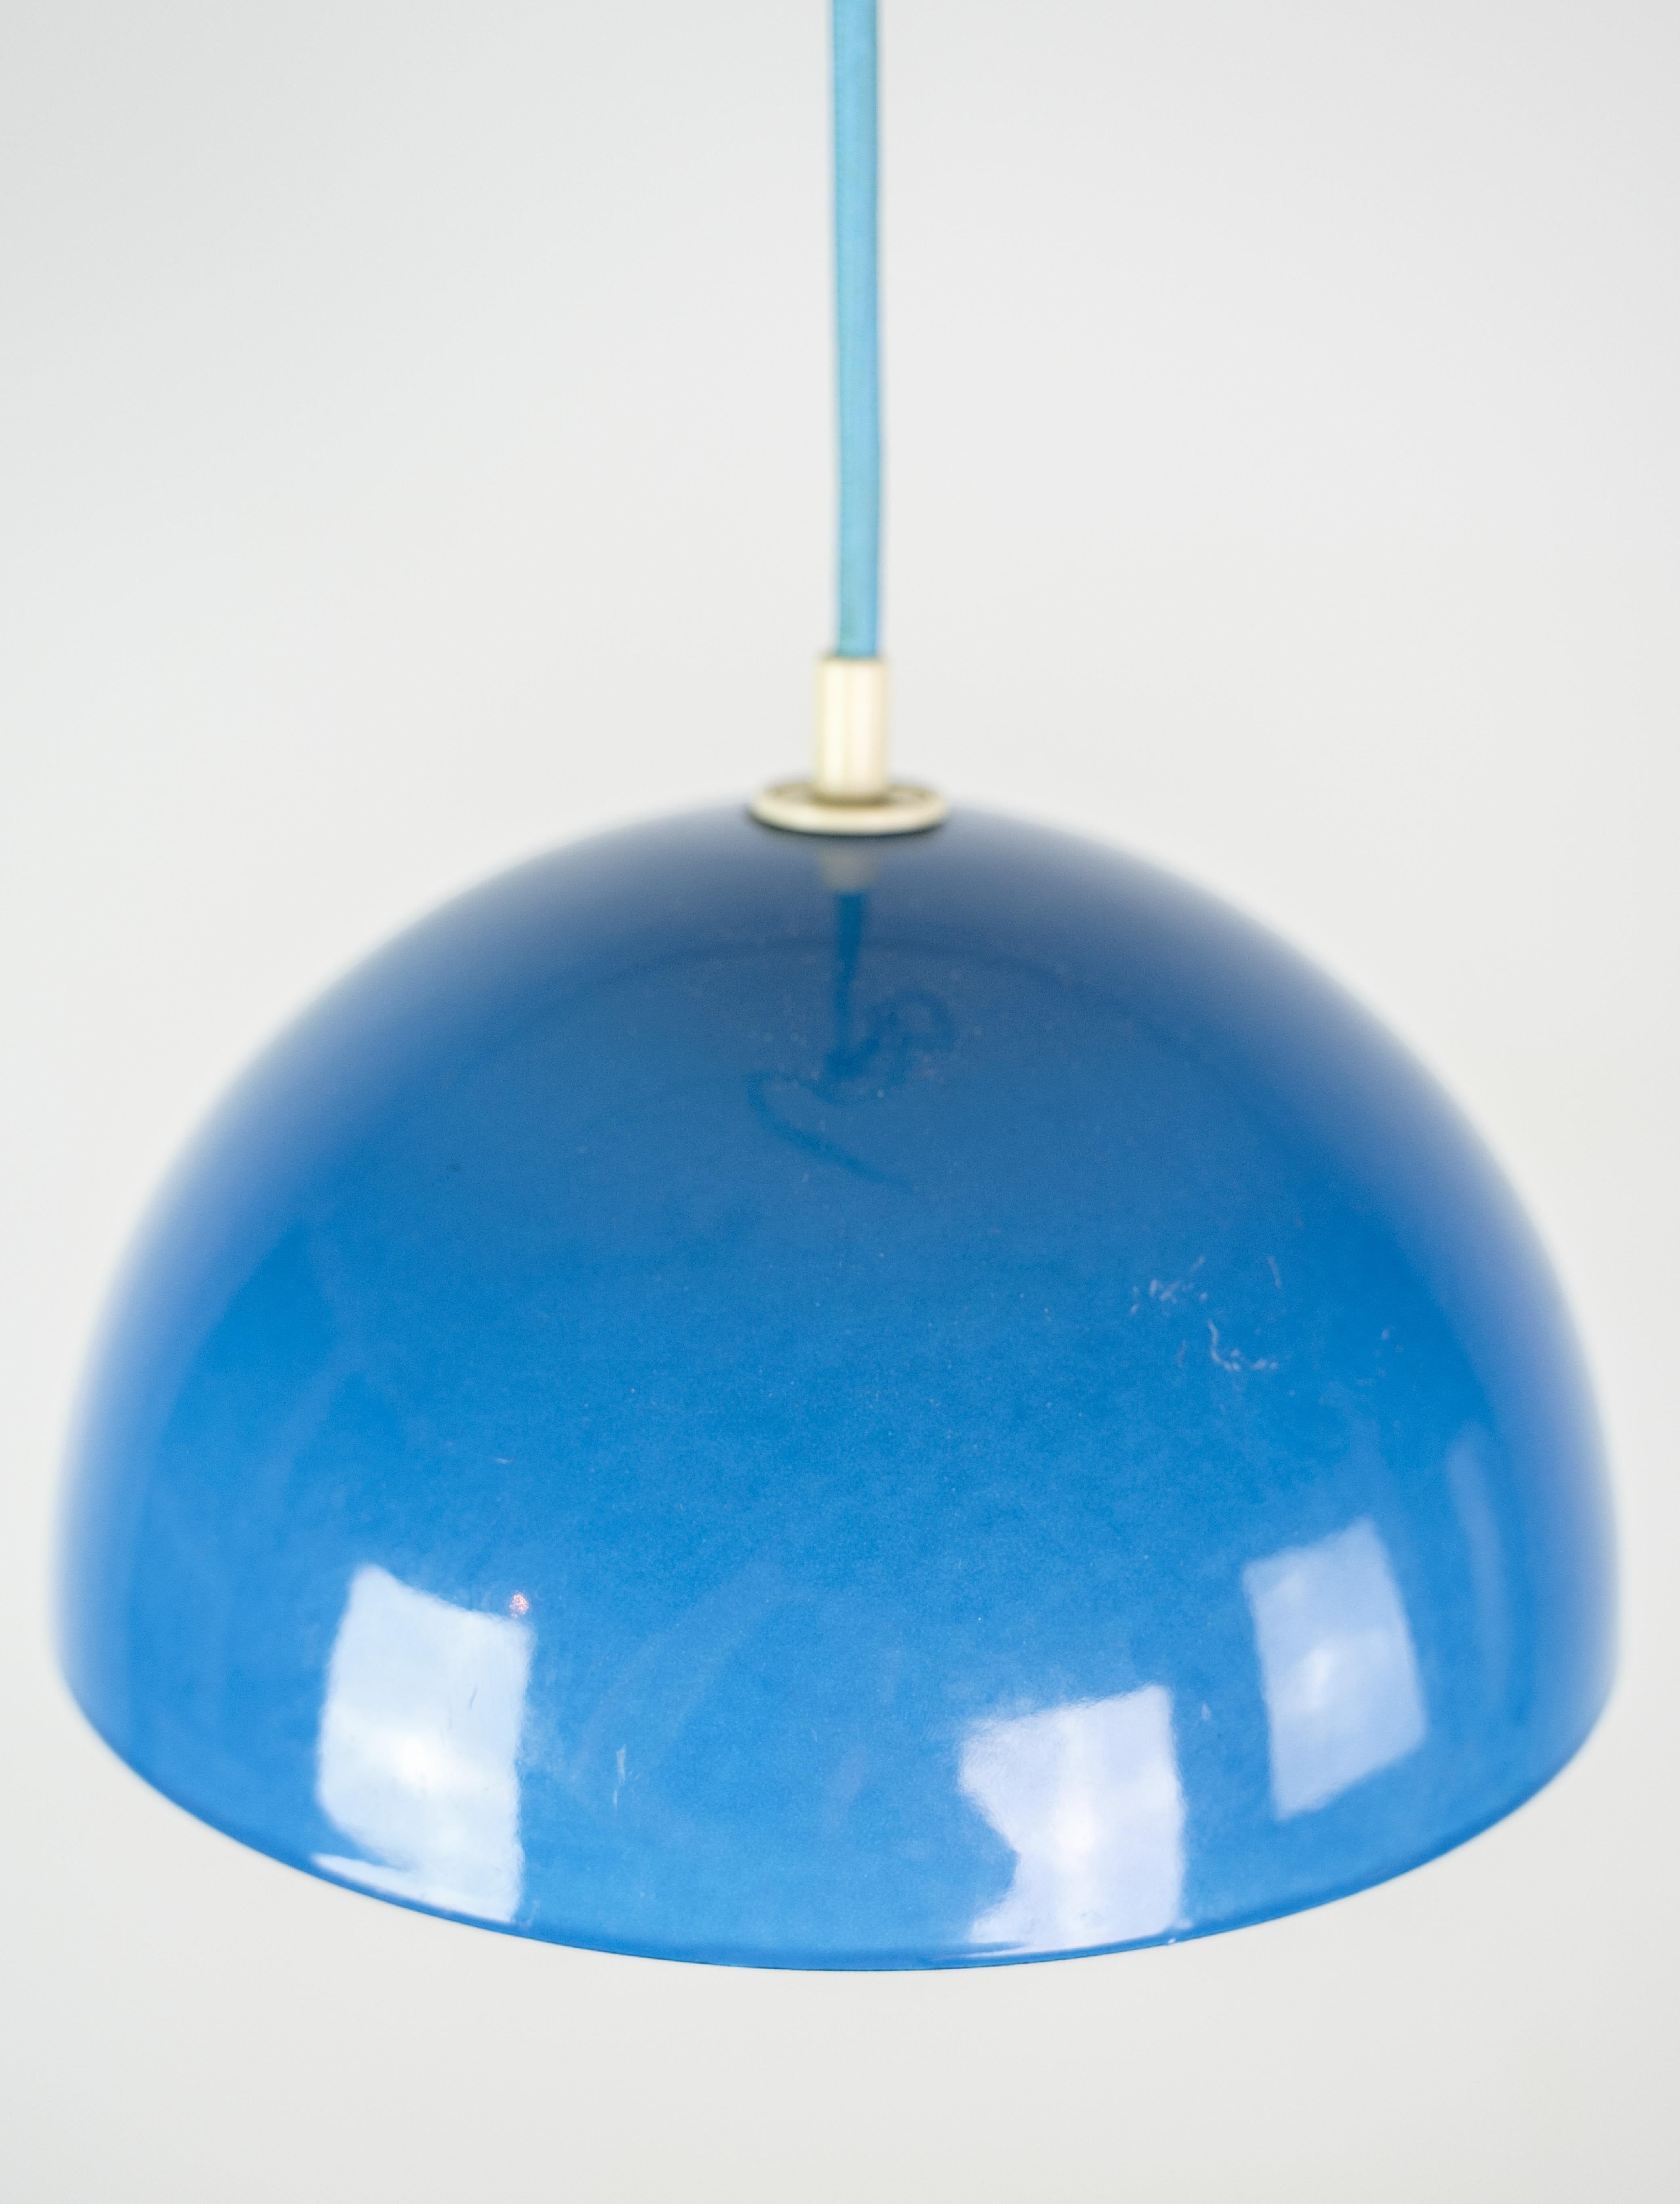 
The Flowerpot ceiling lamp, model VP1, designed by Verner Panton in the 1970s, is an iconic piece of mid-century modern lighting design. Known for his innovative use of color and form, Verner Panton created the Flowerpot lamp with a playful yet